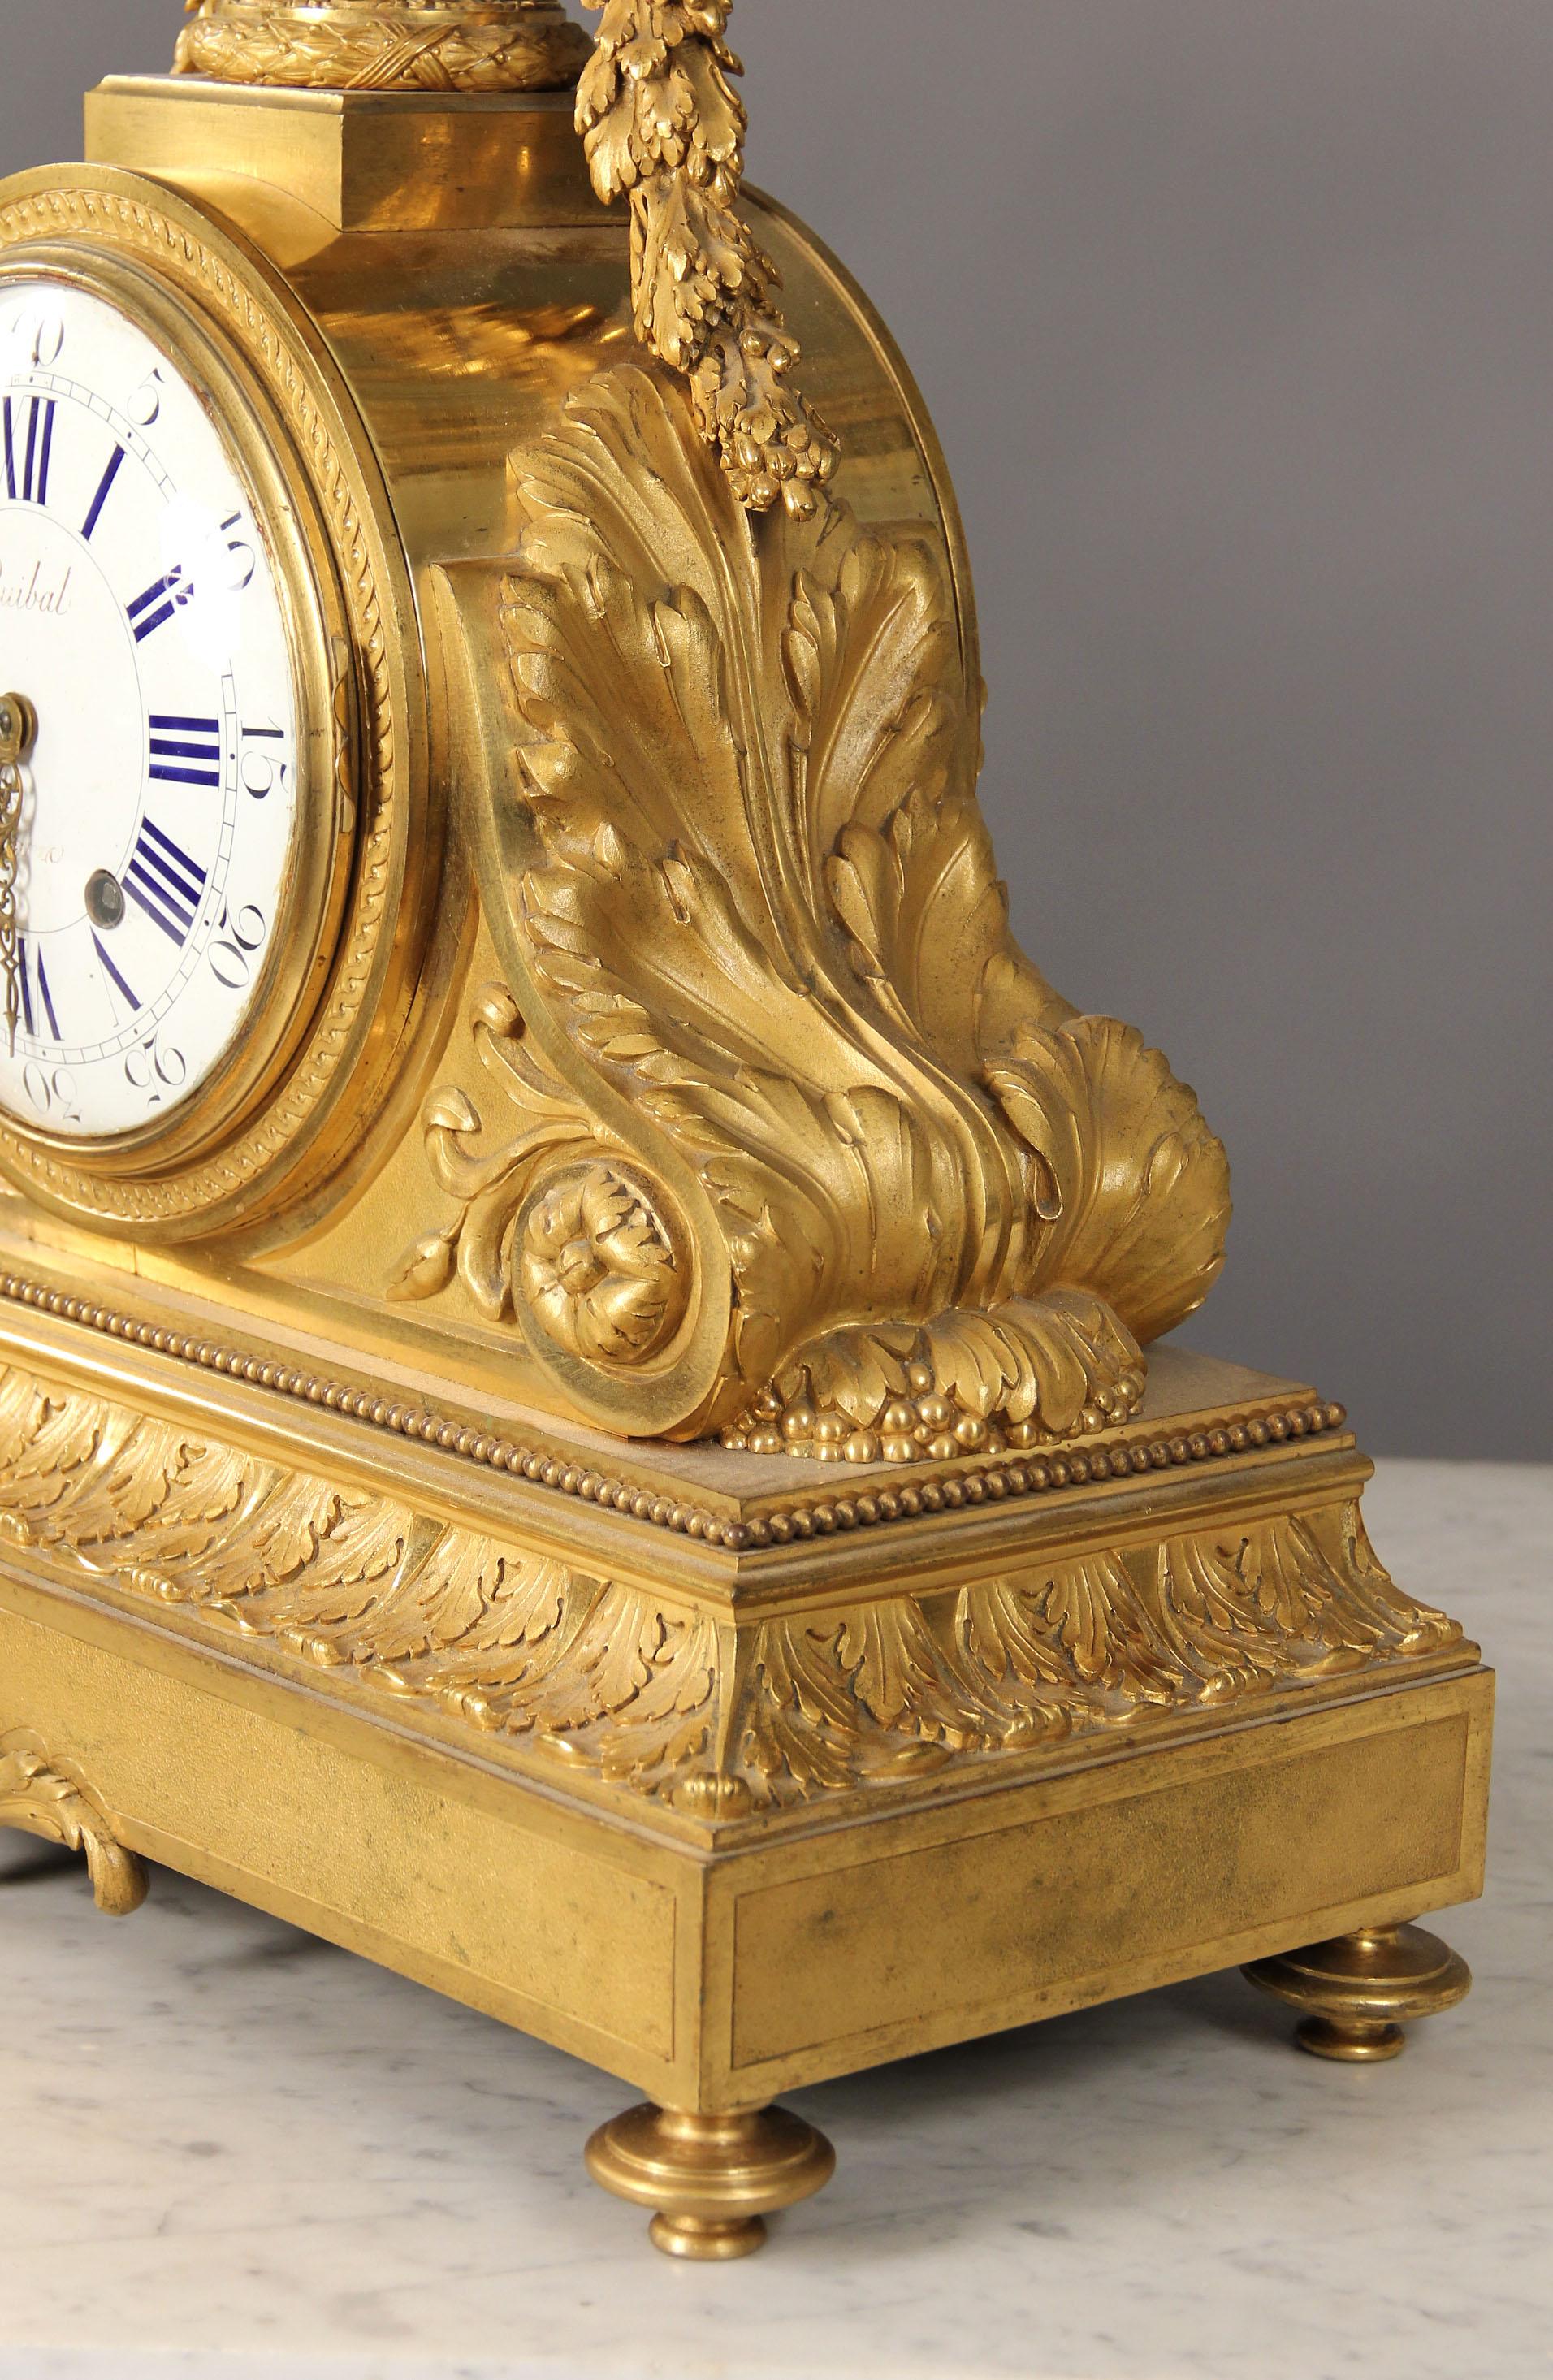 French Large and Fine Quality Late 19th Century Gilt Bronze Mantle Clock, Guibal Paris